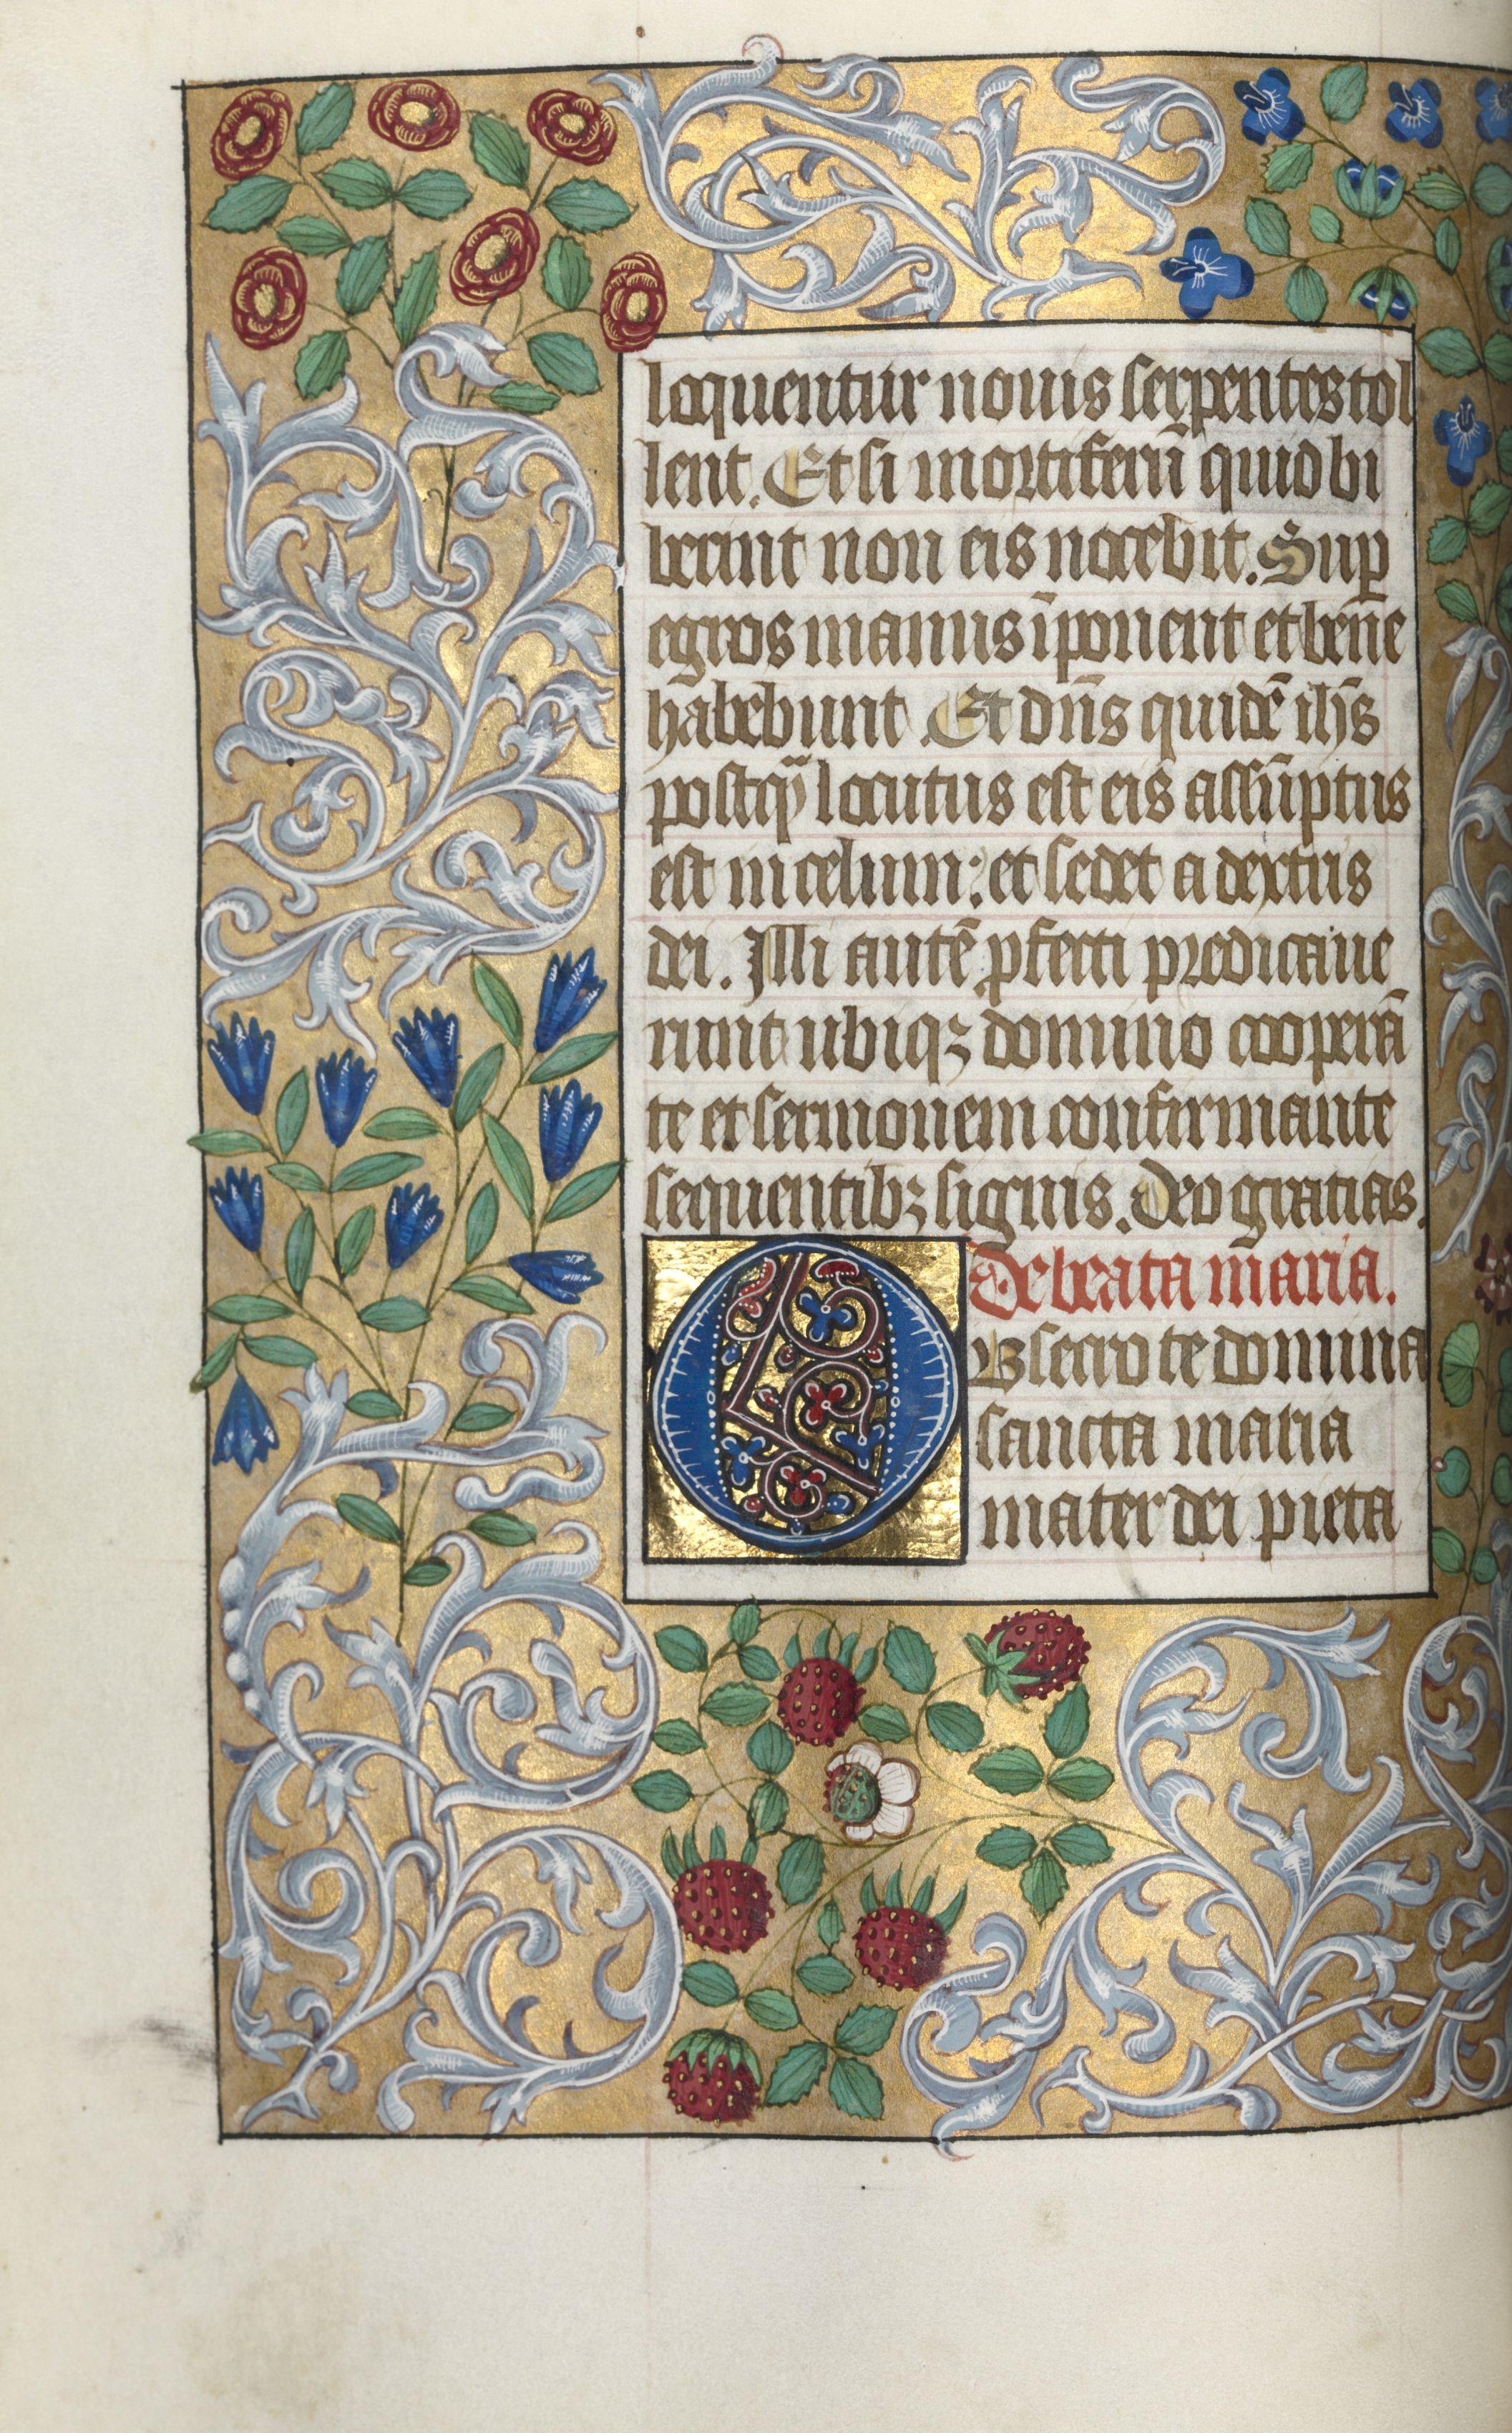 Book of Hours (Use of Rouen): fol. 18v, Prayers to the Virgin, Large Initial O with Elaborate Border